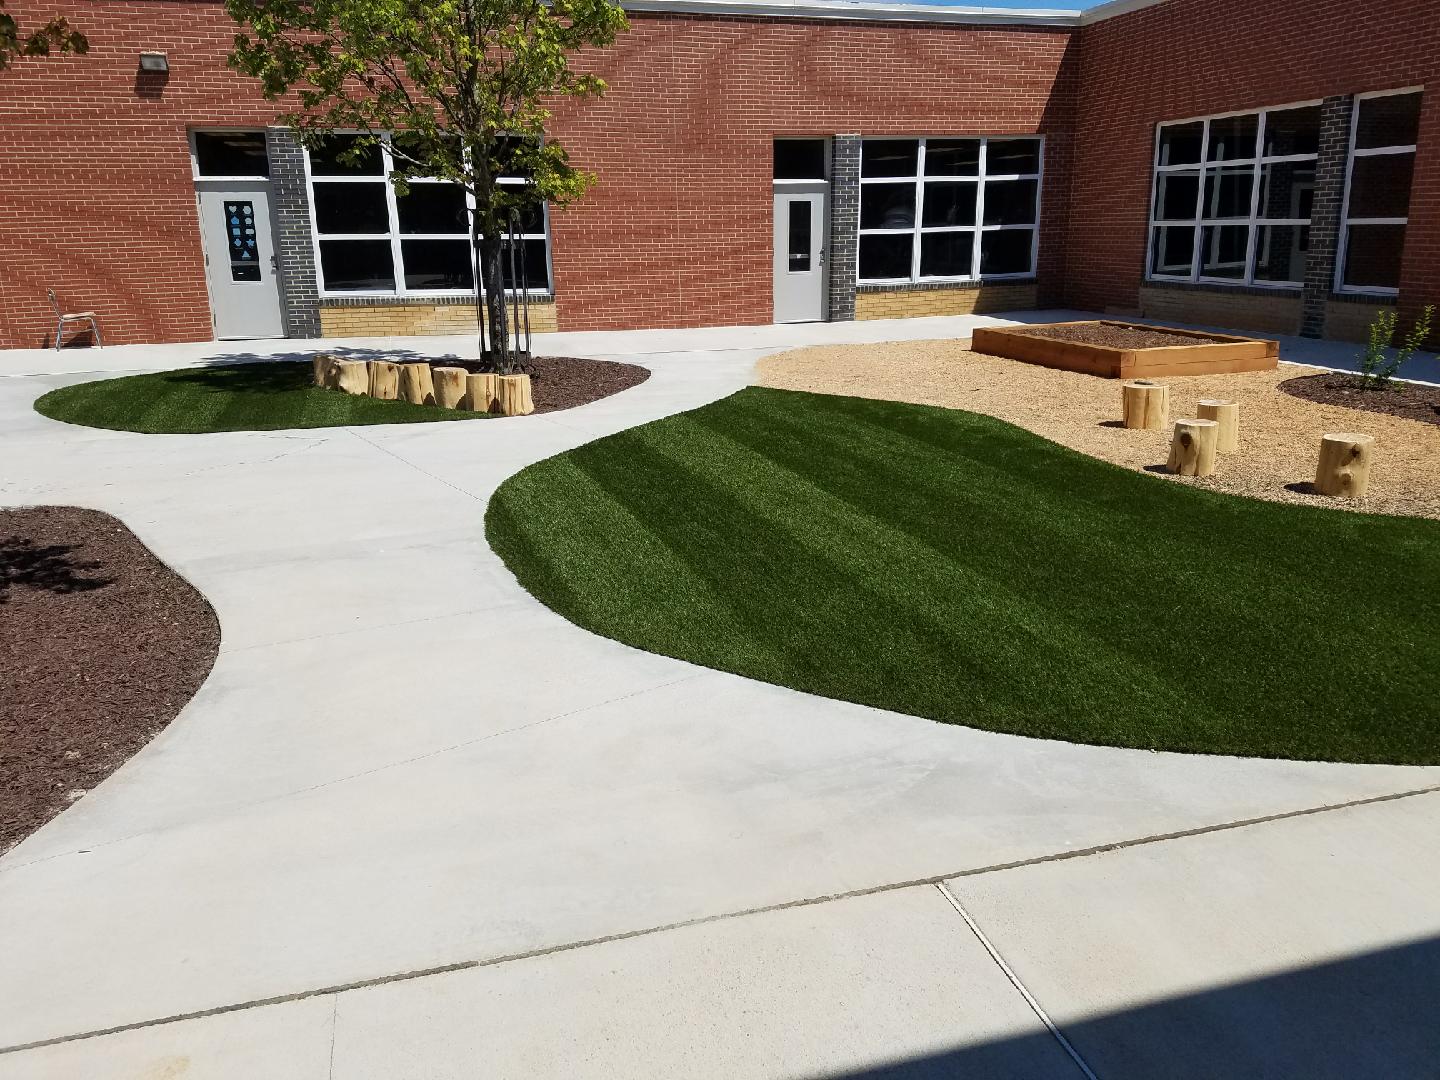 This image shows a landscaped outdoor area with synthetic grass, concrete walkways, wooden stumps for seating, a raised planter box, and a young tree.